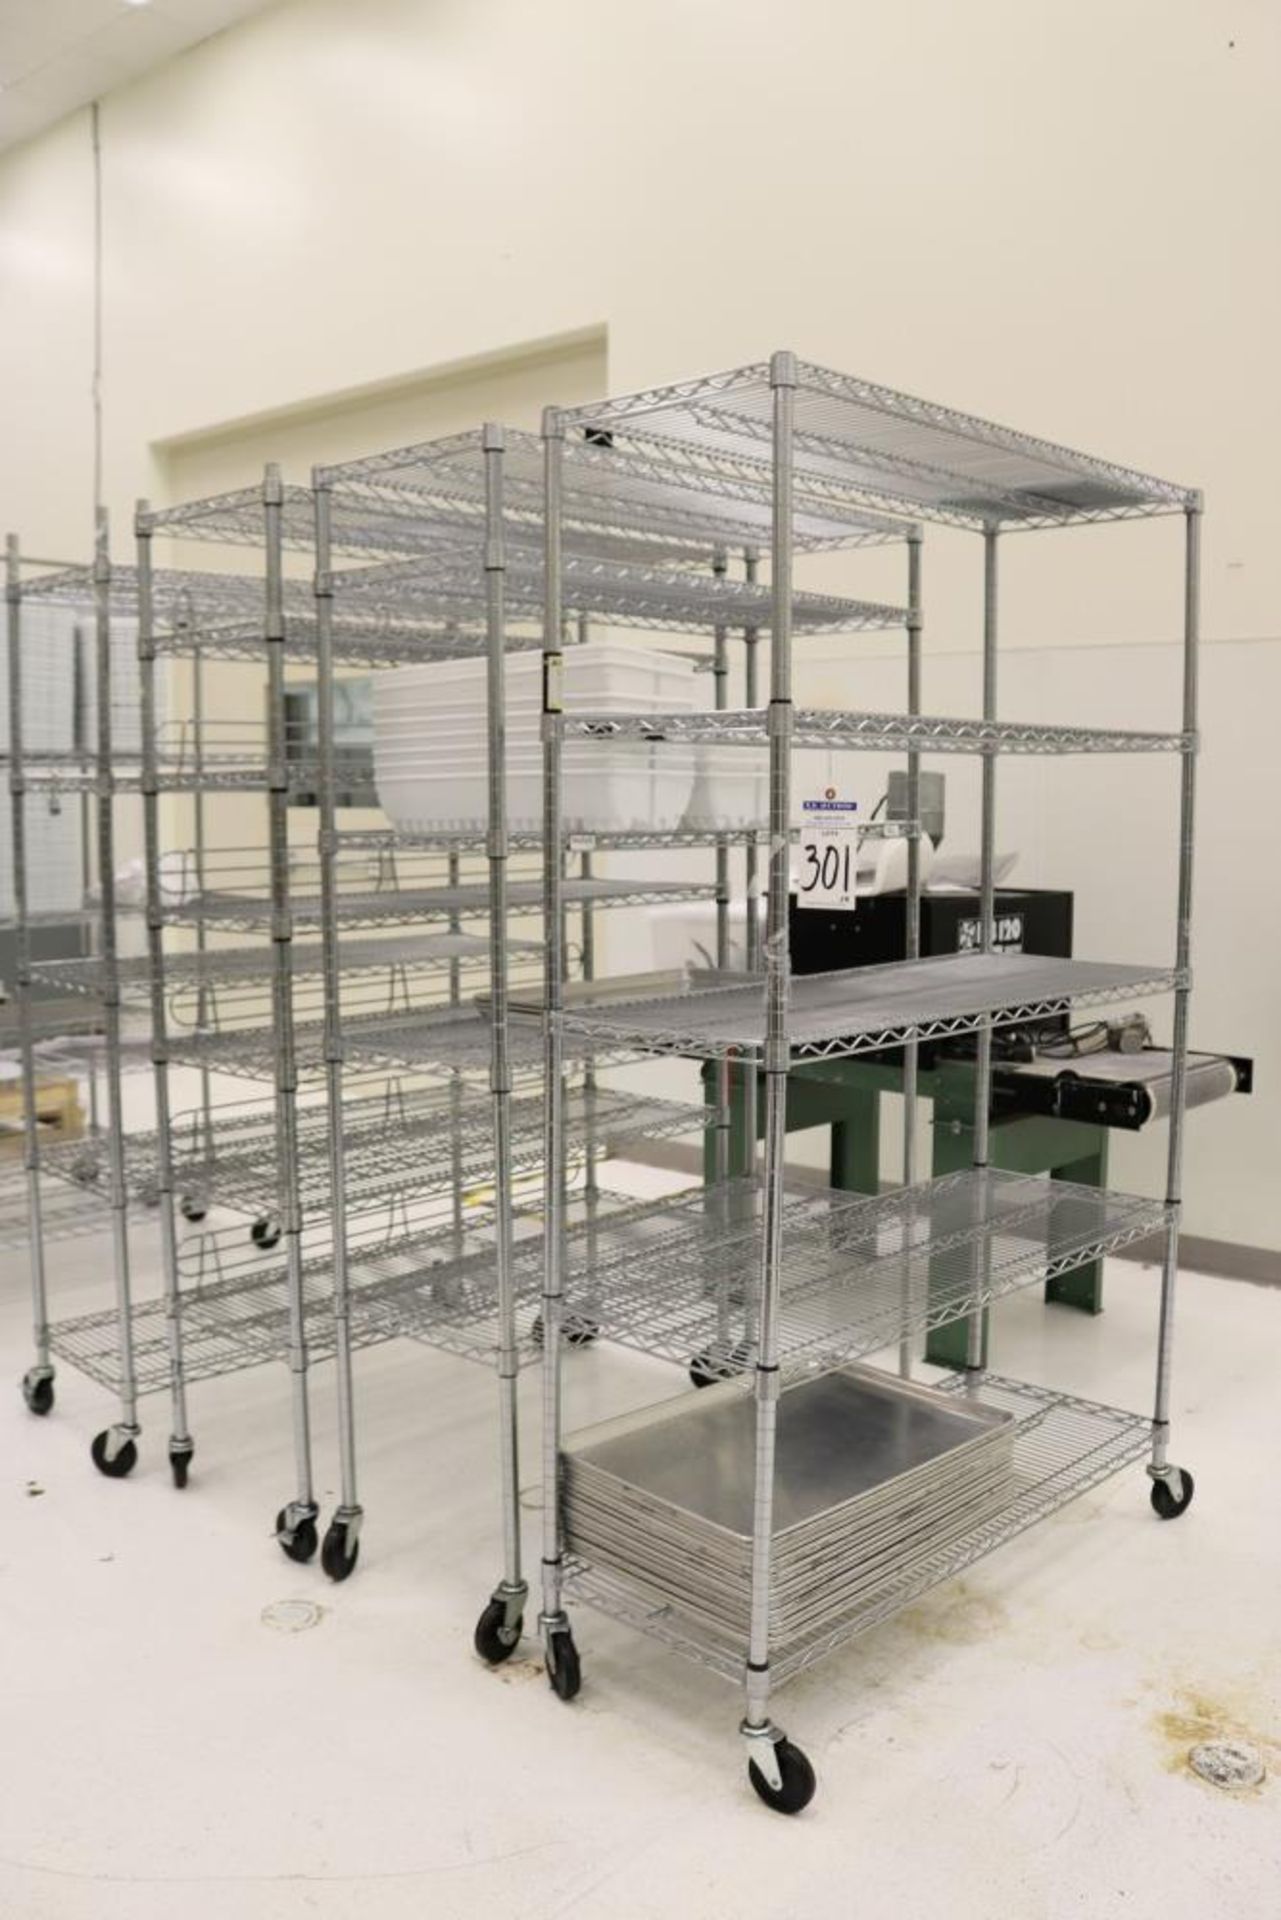 (3) 5 tier and (1) 7 tier Rolling Parts Racks 18" x 48" x 77" (Racks ONLY) - Image 6 of 6